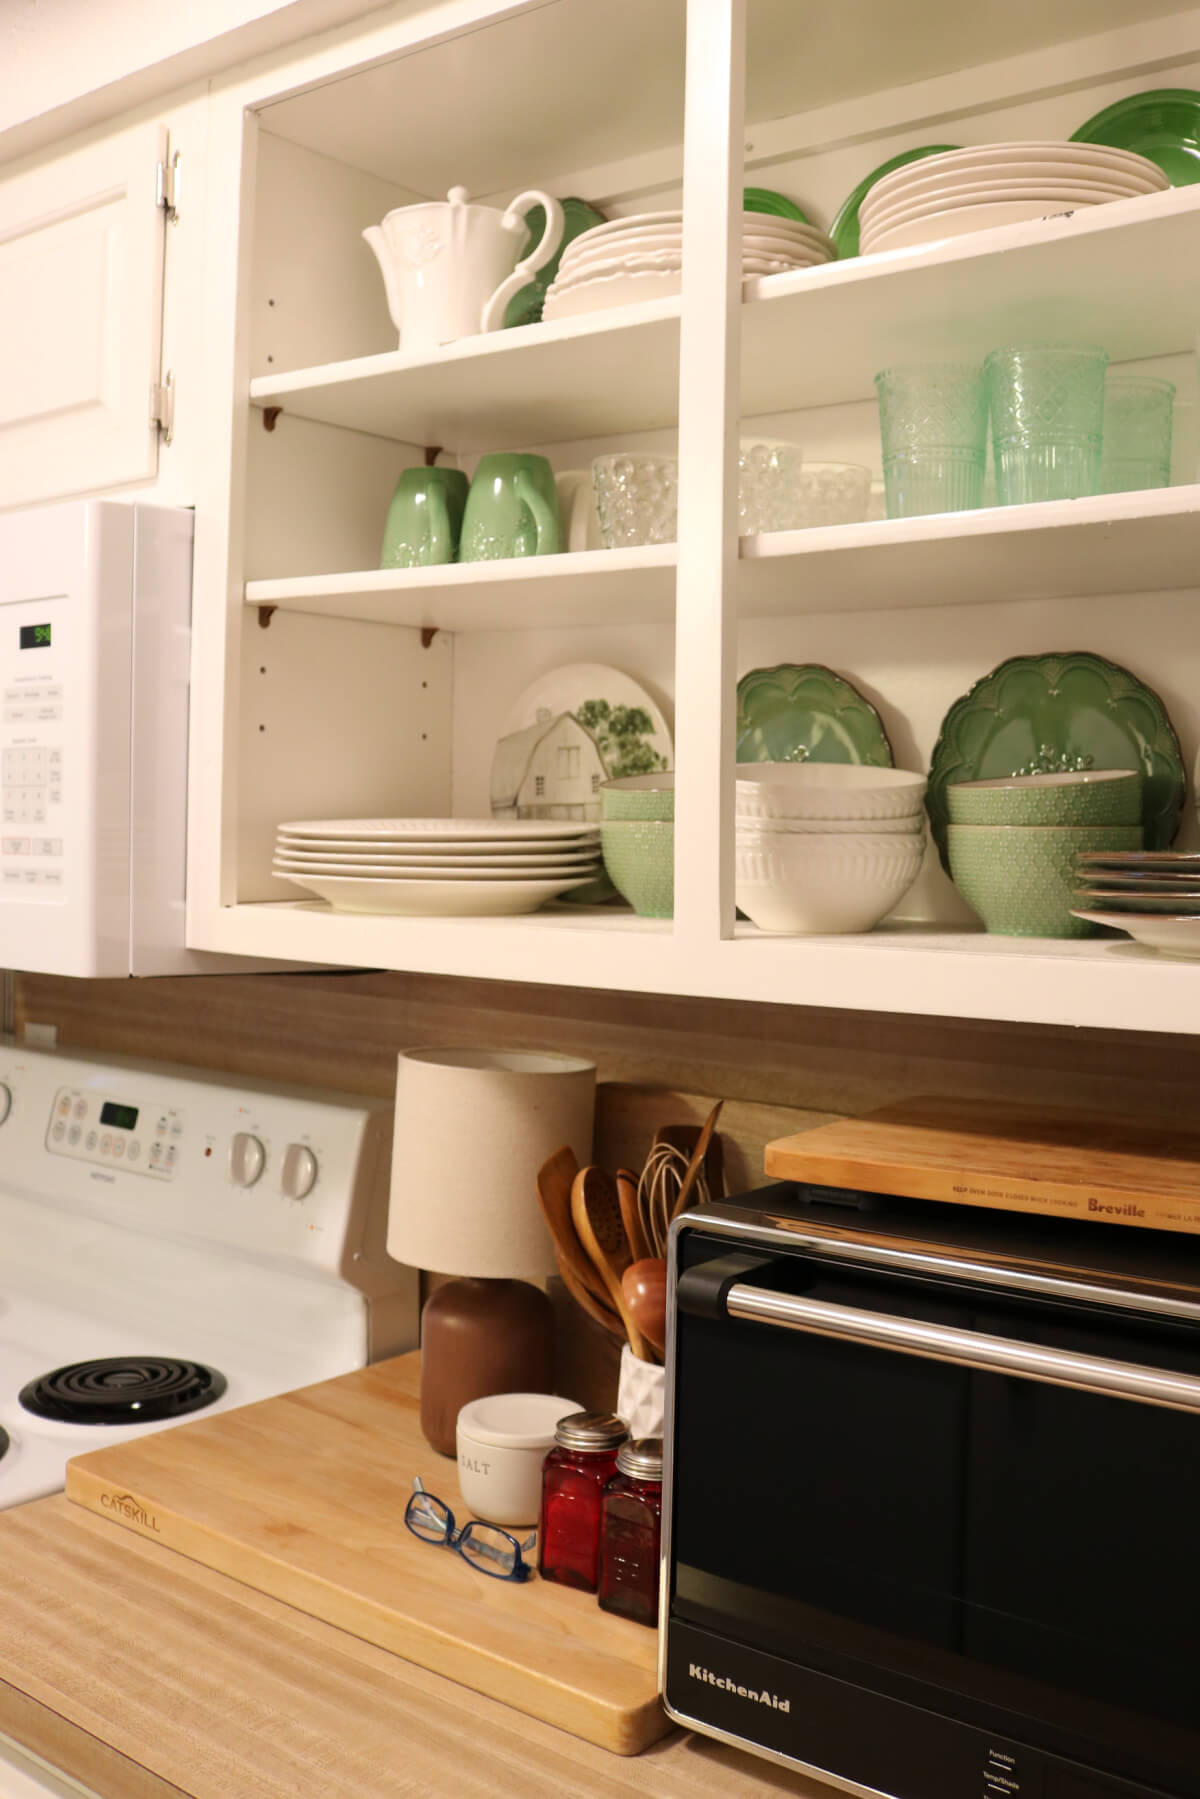 In I've Decorated My Kitchen In A New Color, I'm loving the more muted shades of green and white. 